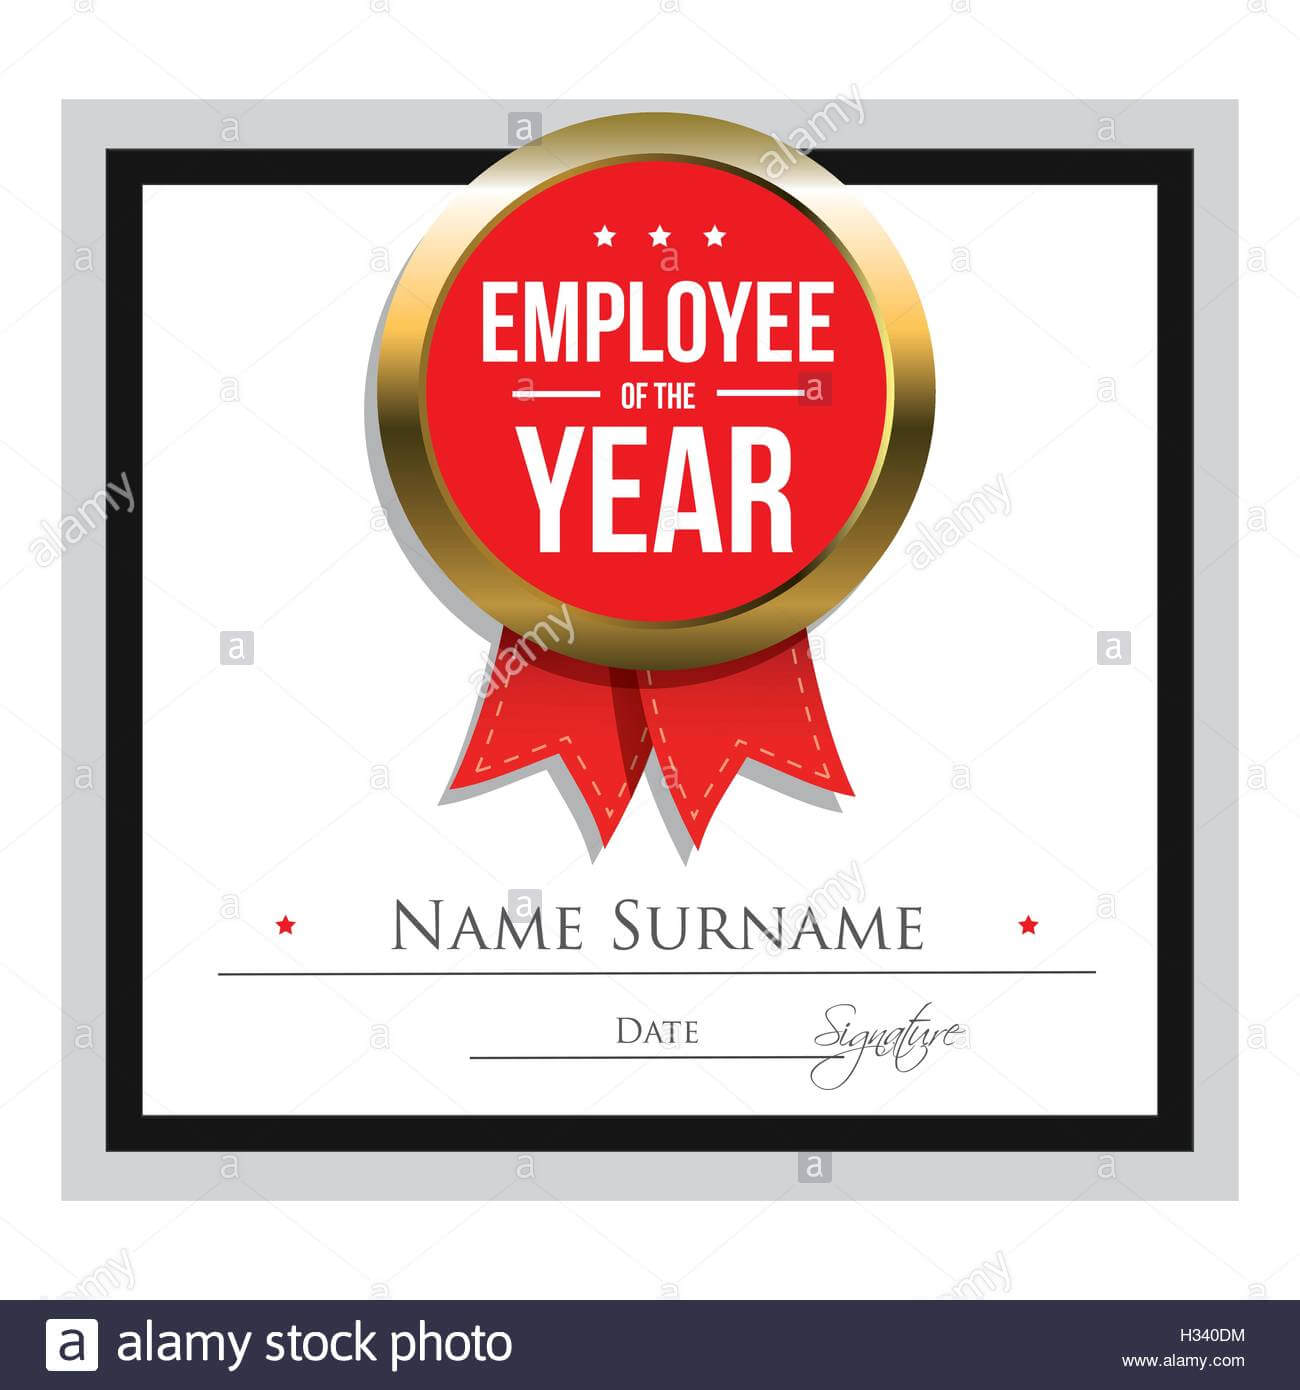 Employee Of The Year Certificate Template Stock Vector Art With Star Of The Week Certificate Template